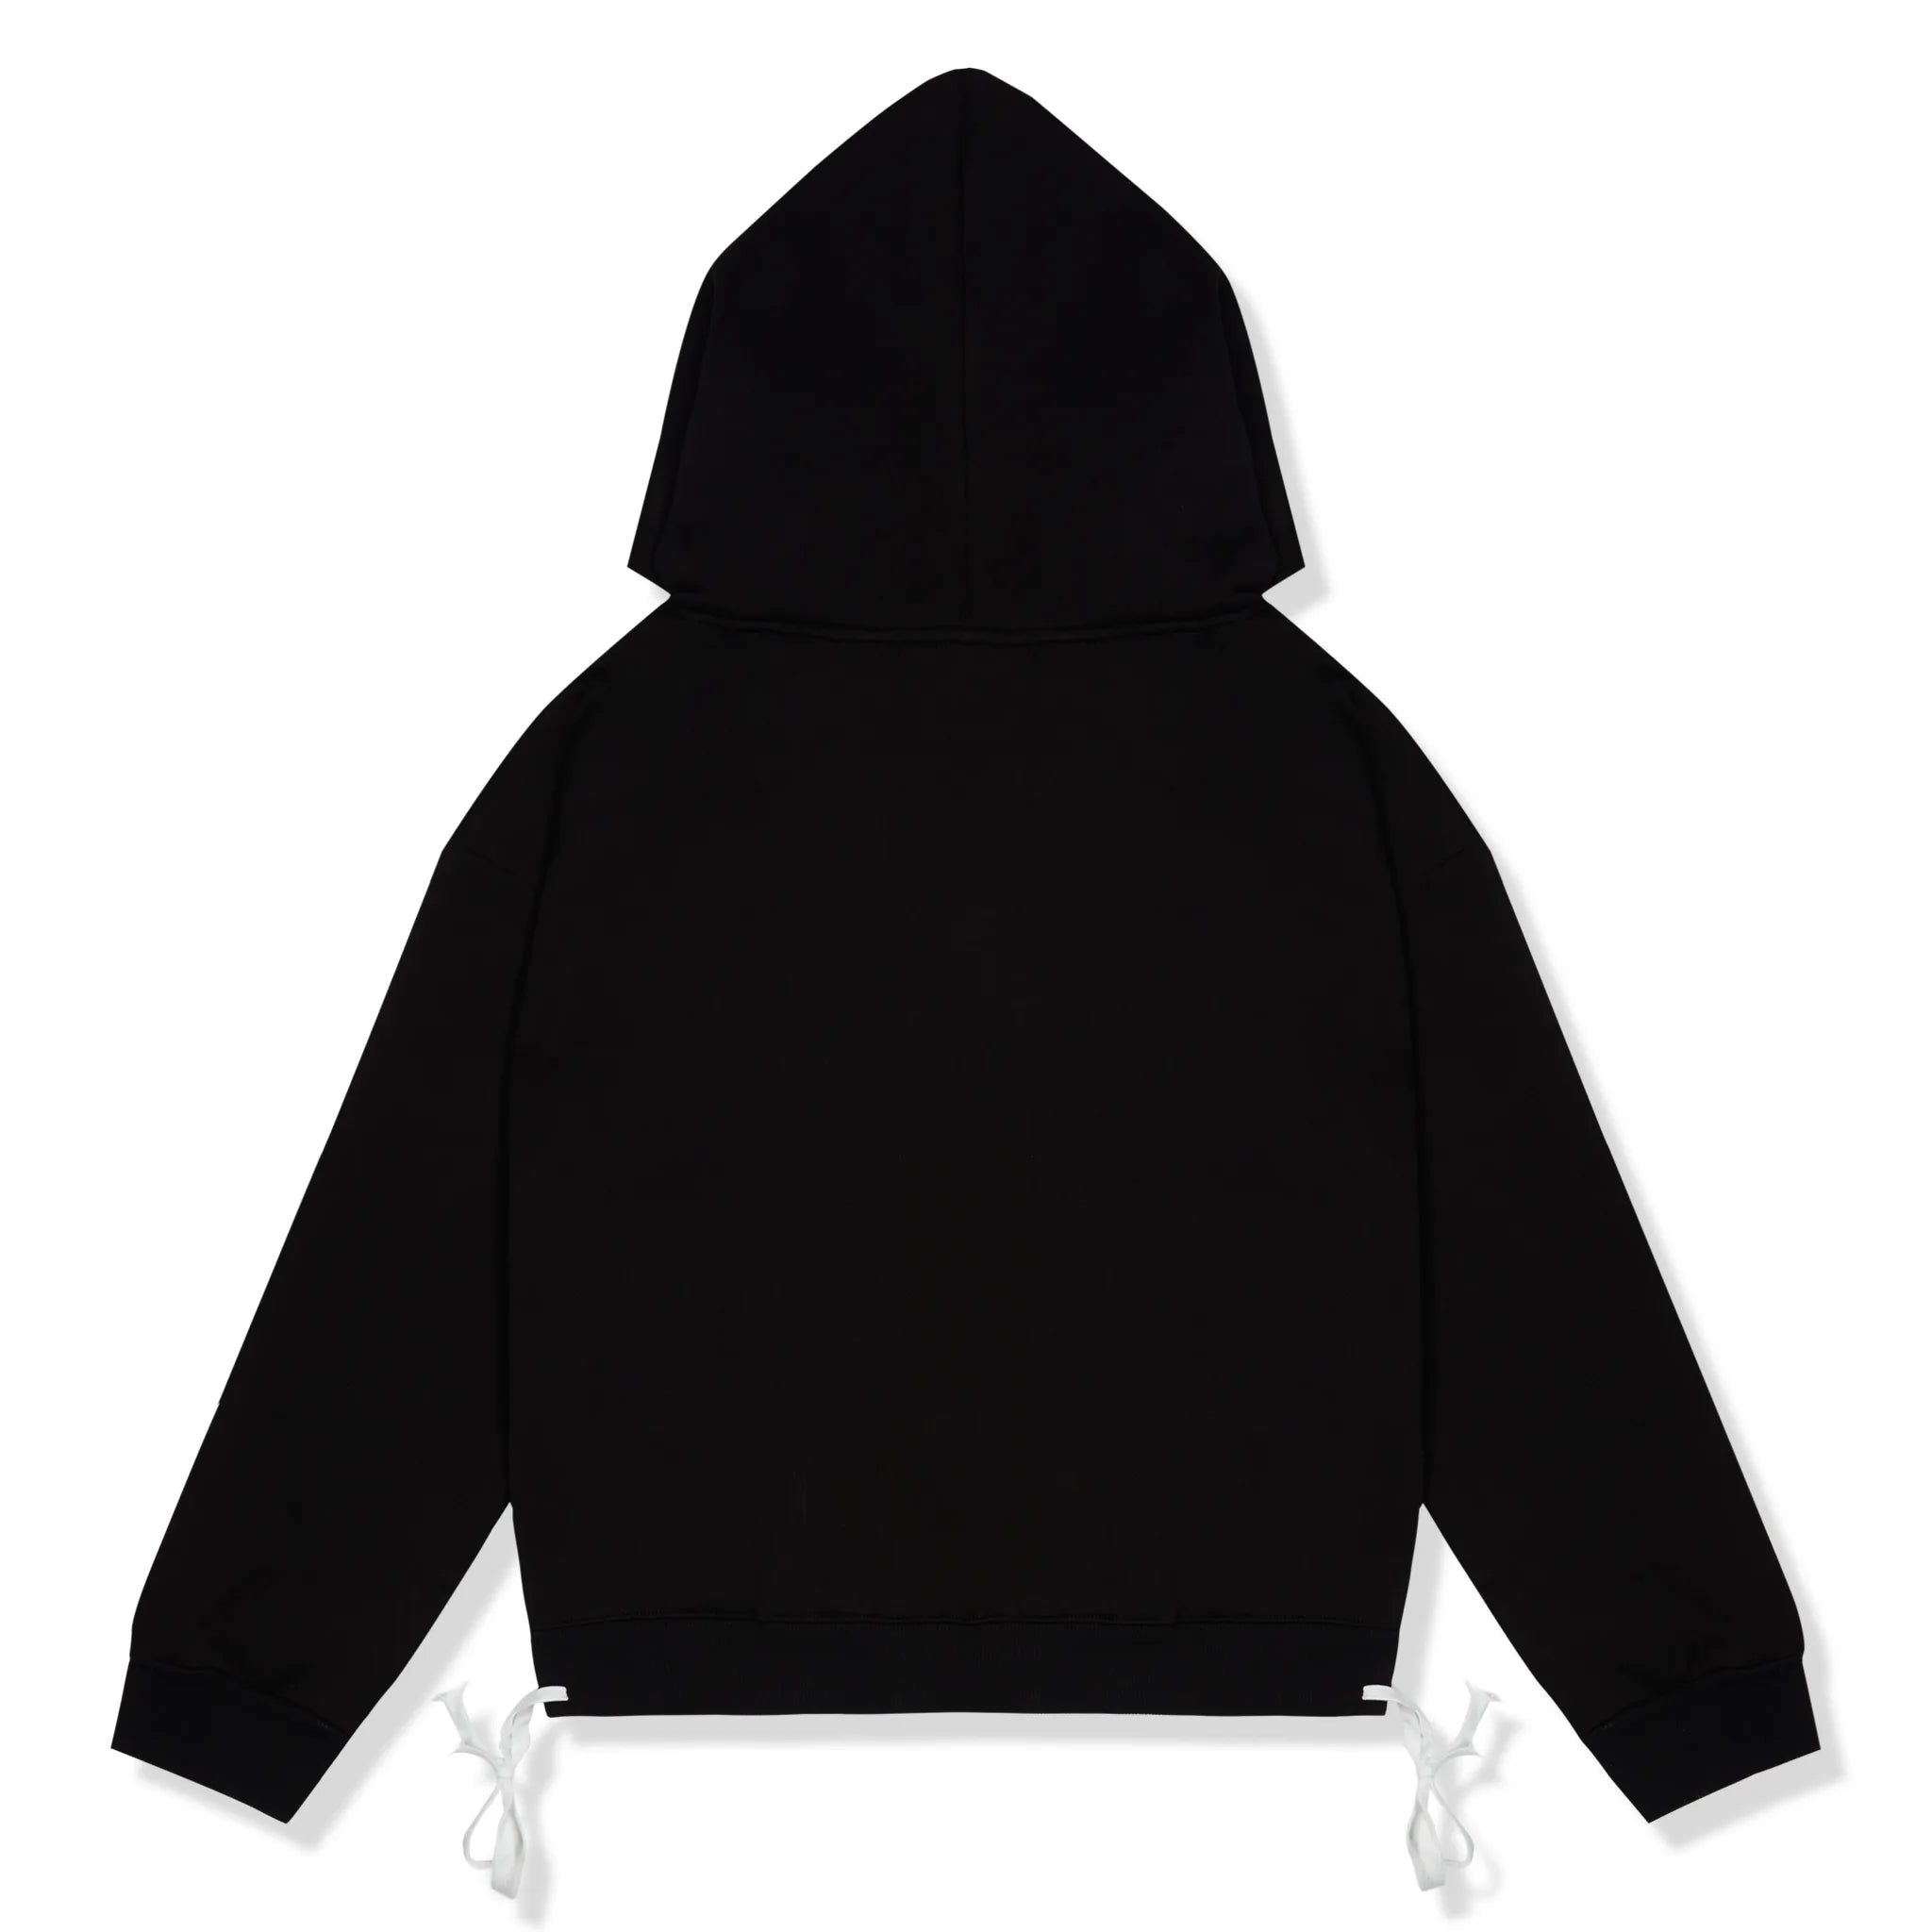 Back view of Carsicko Signature Black Hoodie